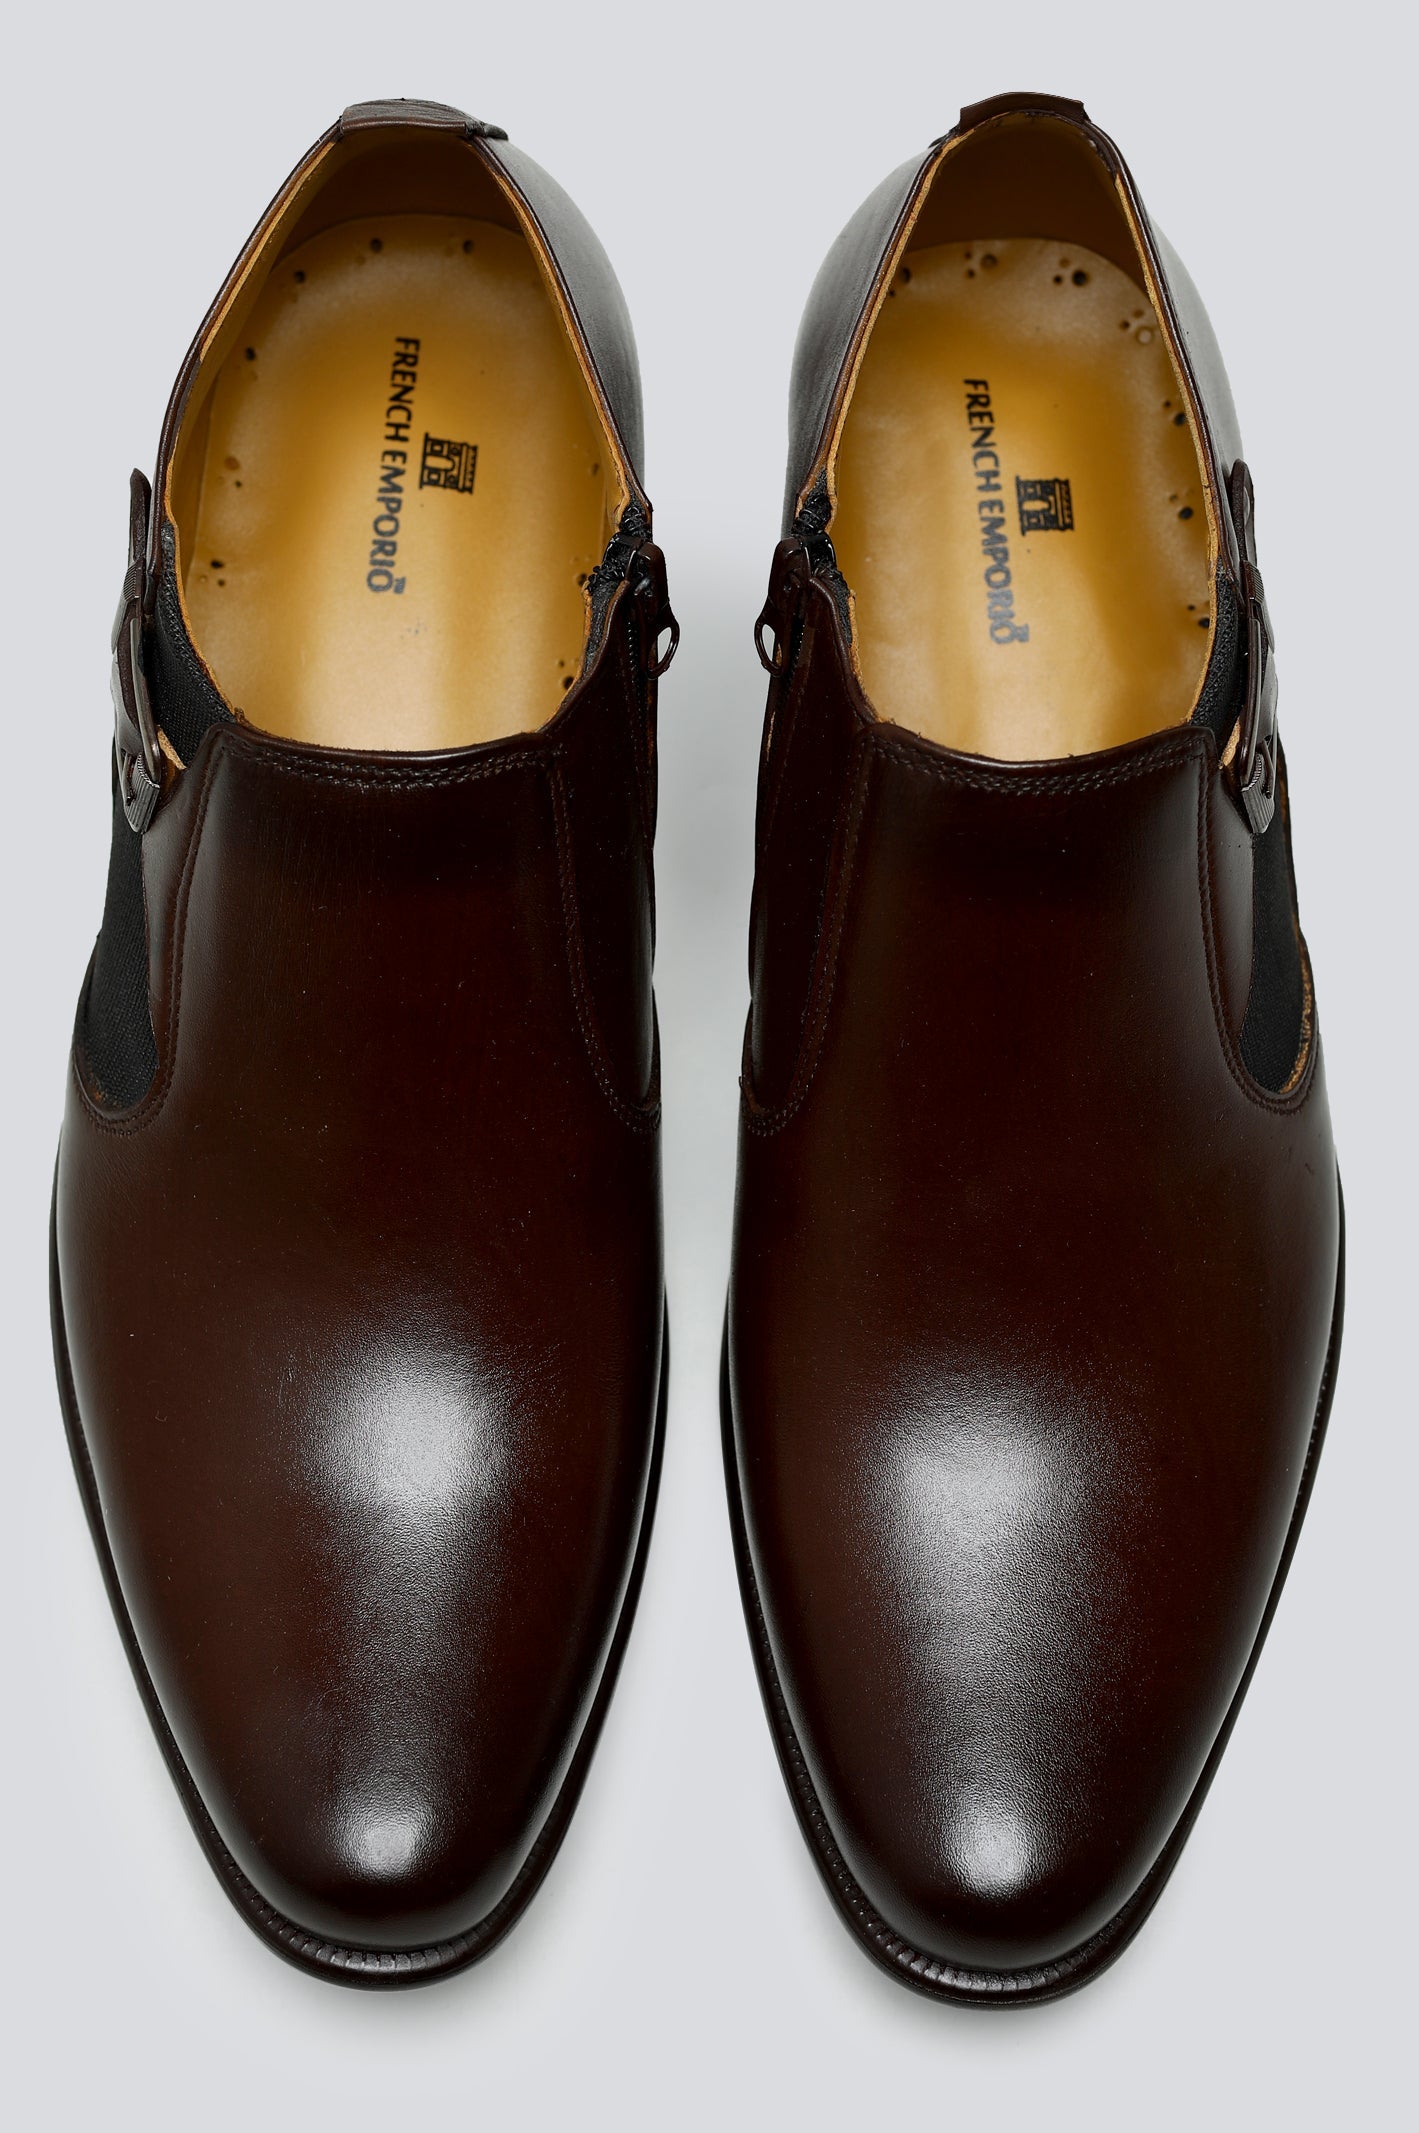 Brown Formal Shoes For Men - Diners